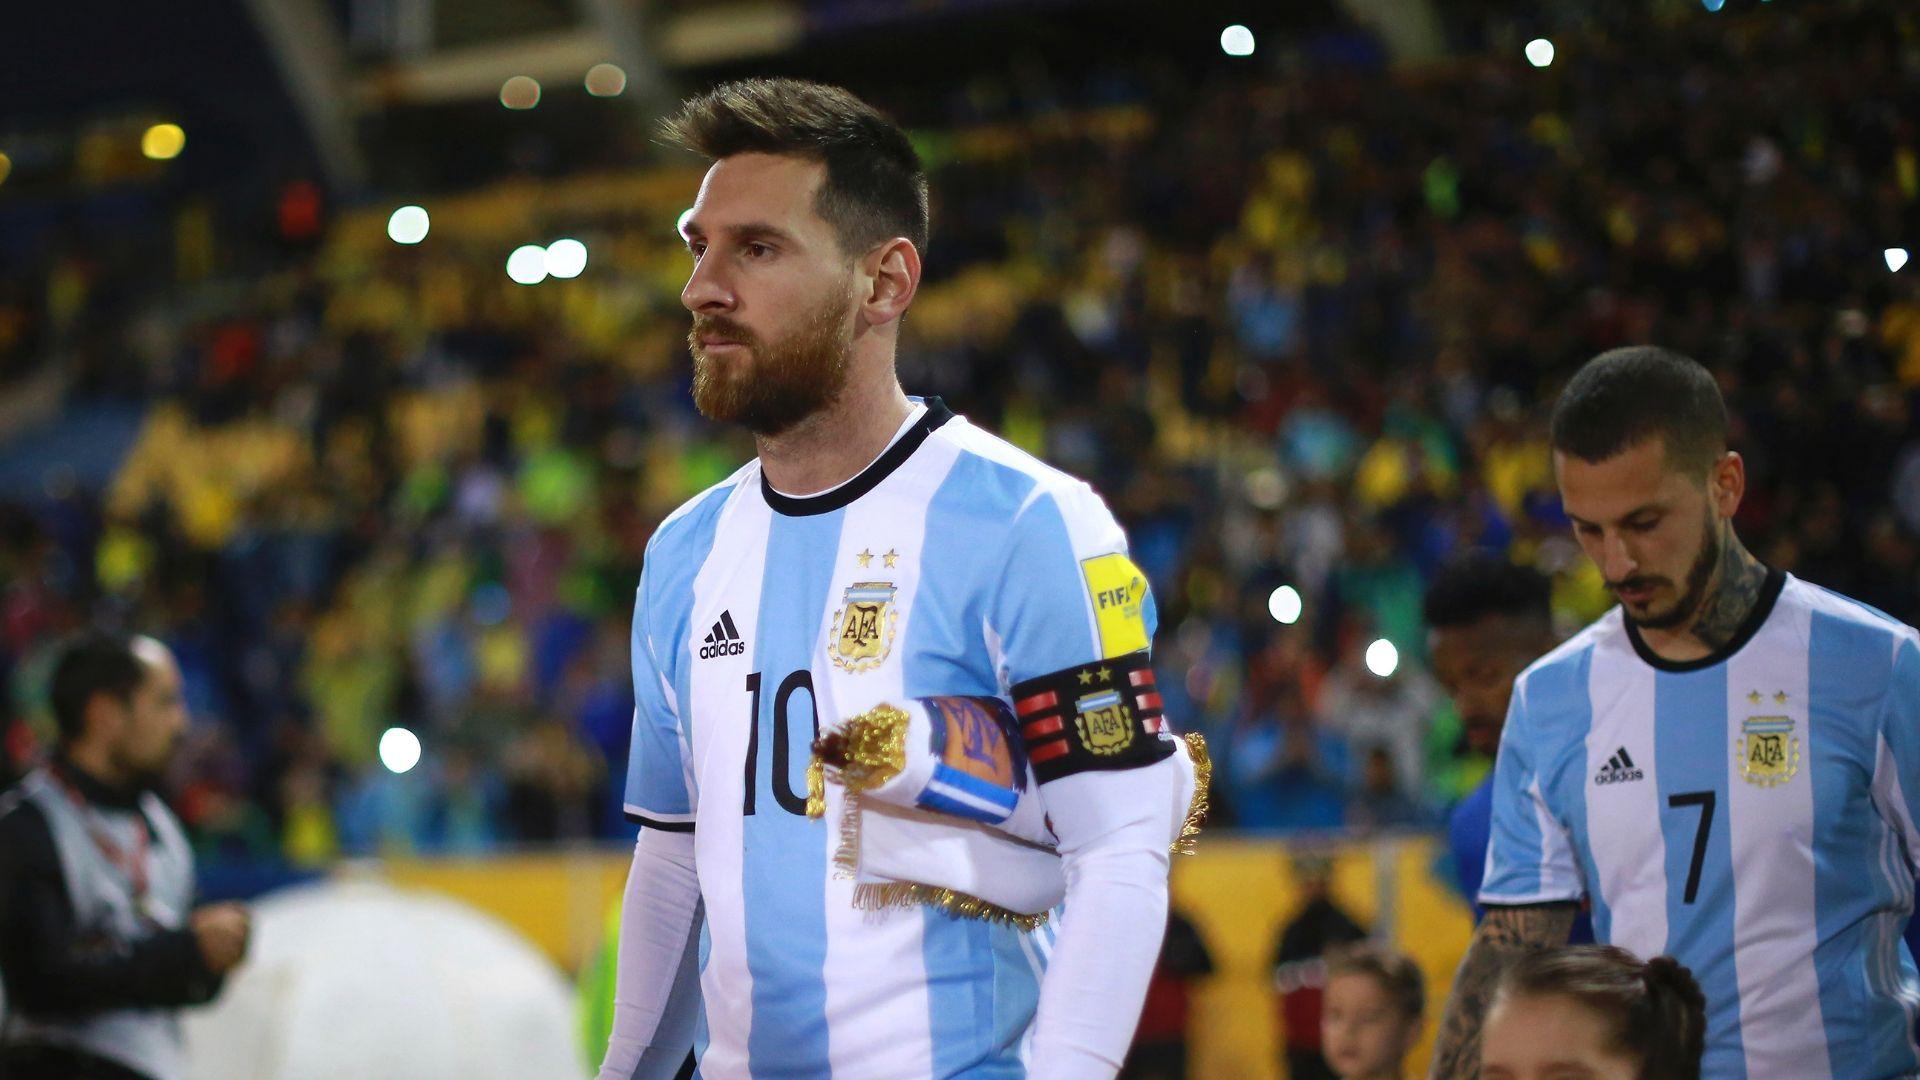 WATCH: Messi unsure if 2018 World Cup will be his last